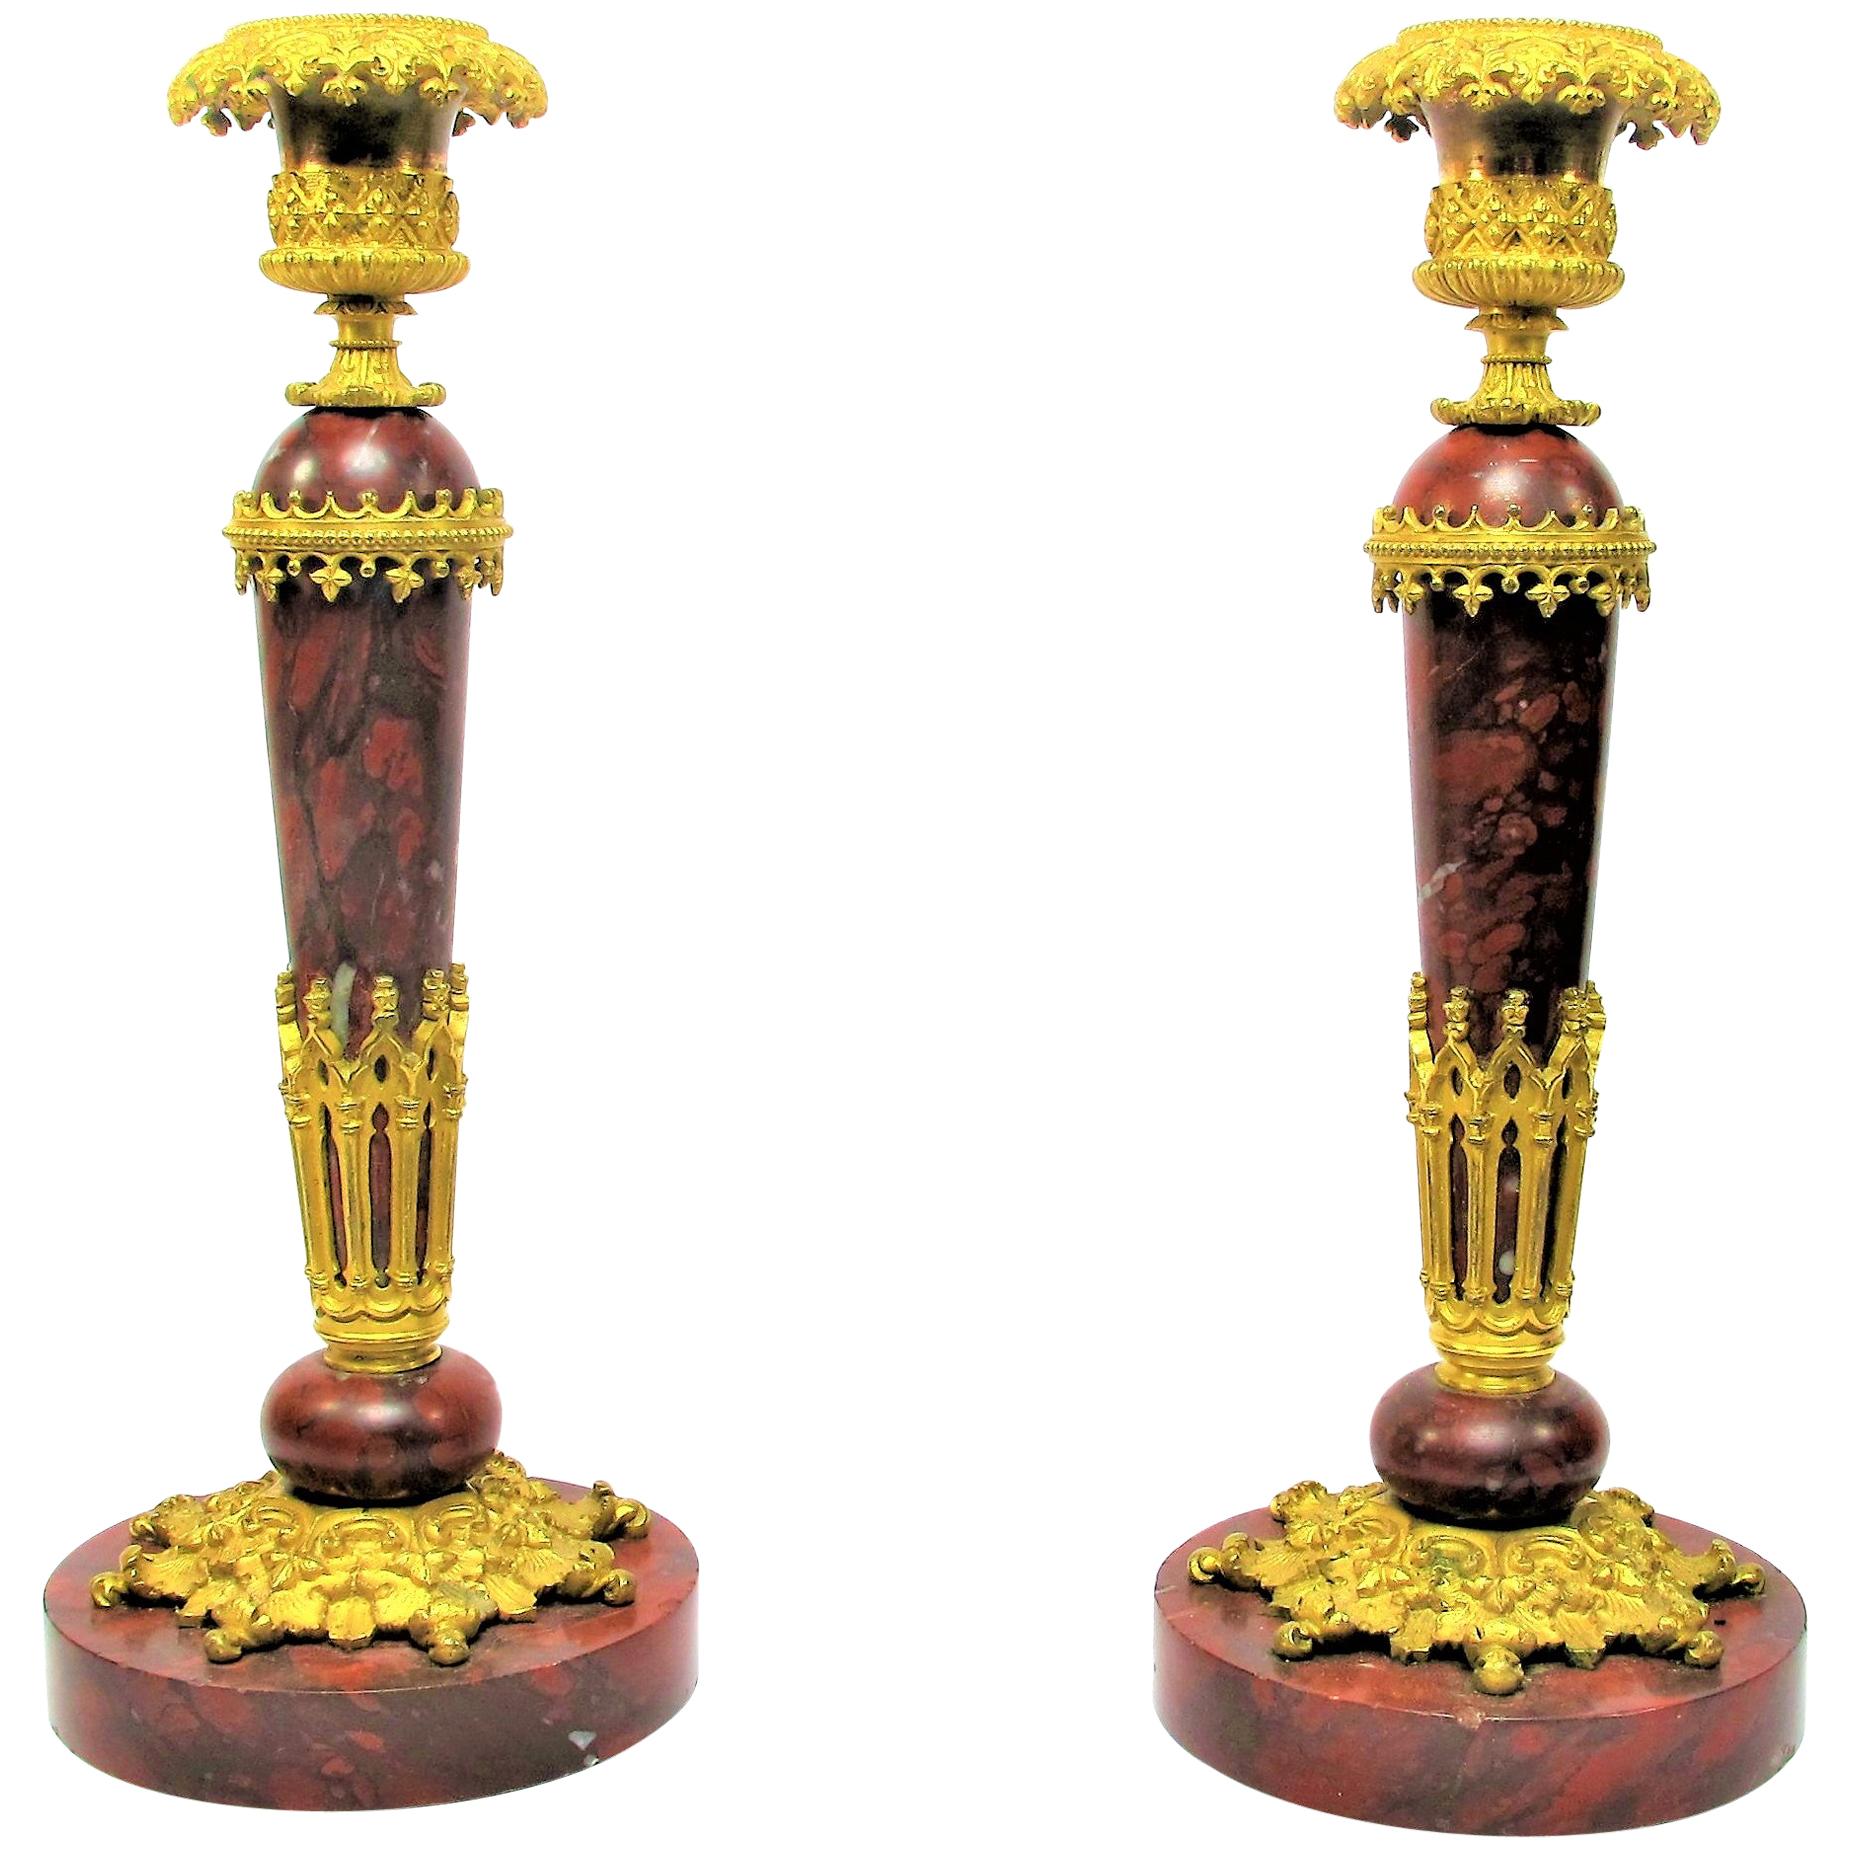 Pair of Neo-Gothic Style Candlesticks Bronze and Marble, 1830 Period For Sale